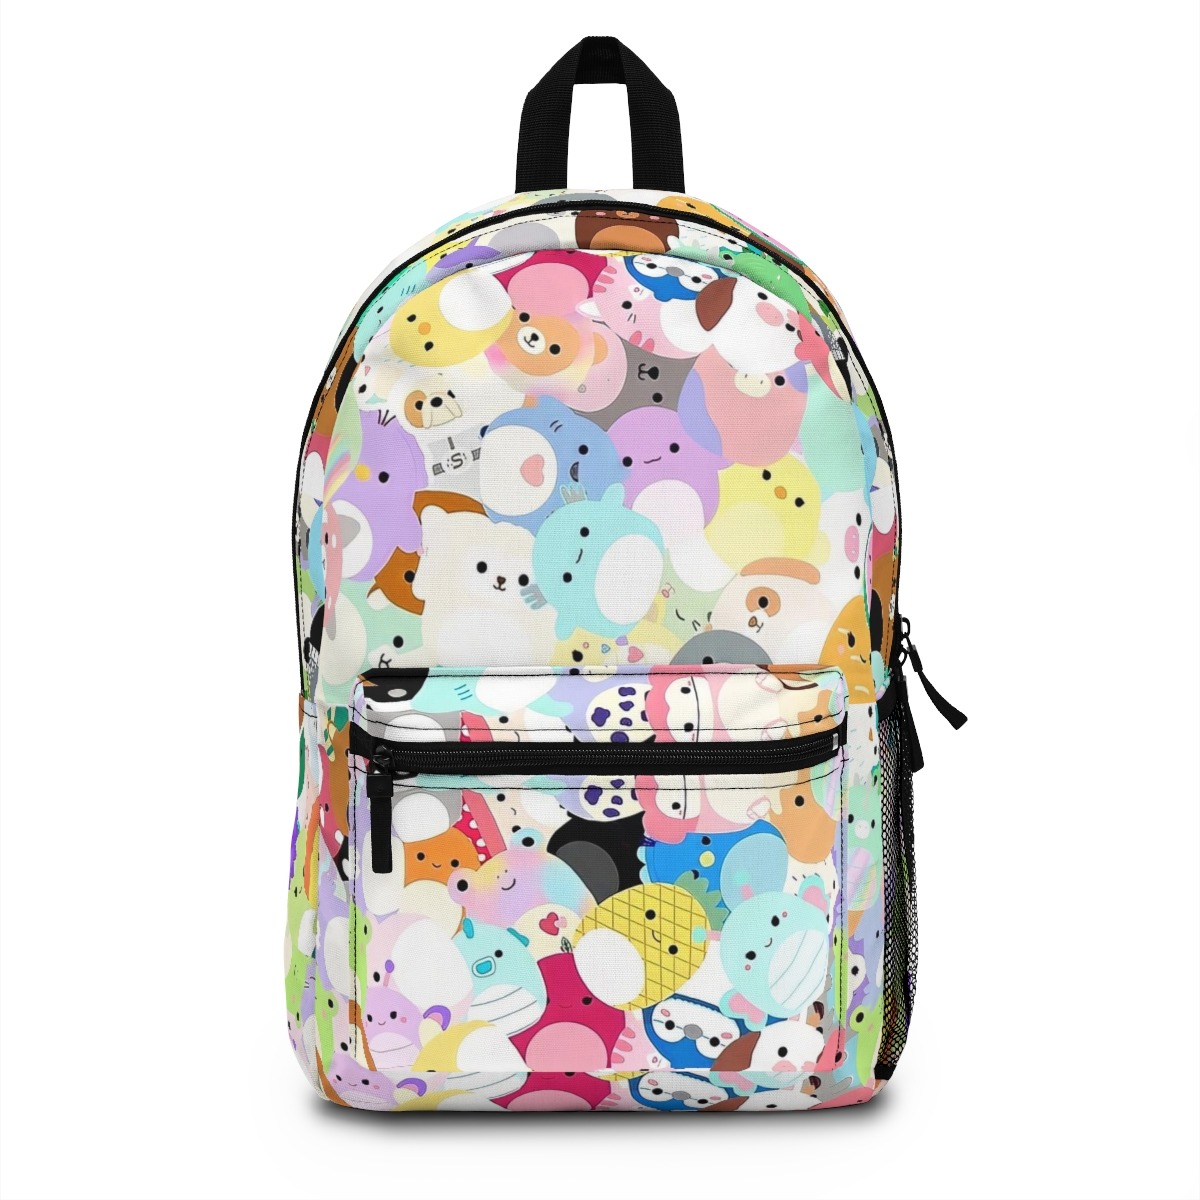 Squishmallows Chaotic Frenzy Cute Squishmallow Artwork backpack - Squishmallows Chaotic Frenzy Cute Squishmallow Artwork bookbag - Squishmallows Chaotic Frenzy Cute Squishmallow Artwork merch - Squishmallows Chaotic Frenzy Cute Squishmallow Artwork apparel